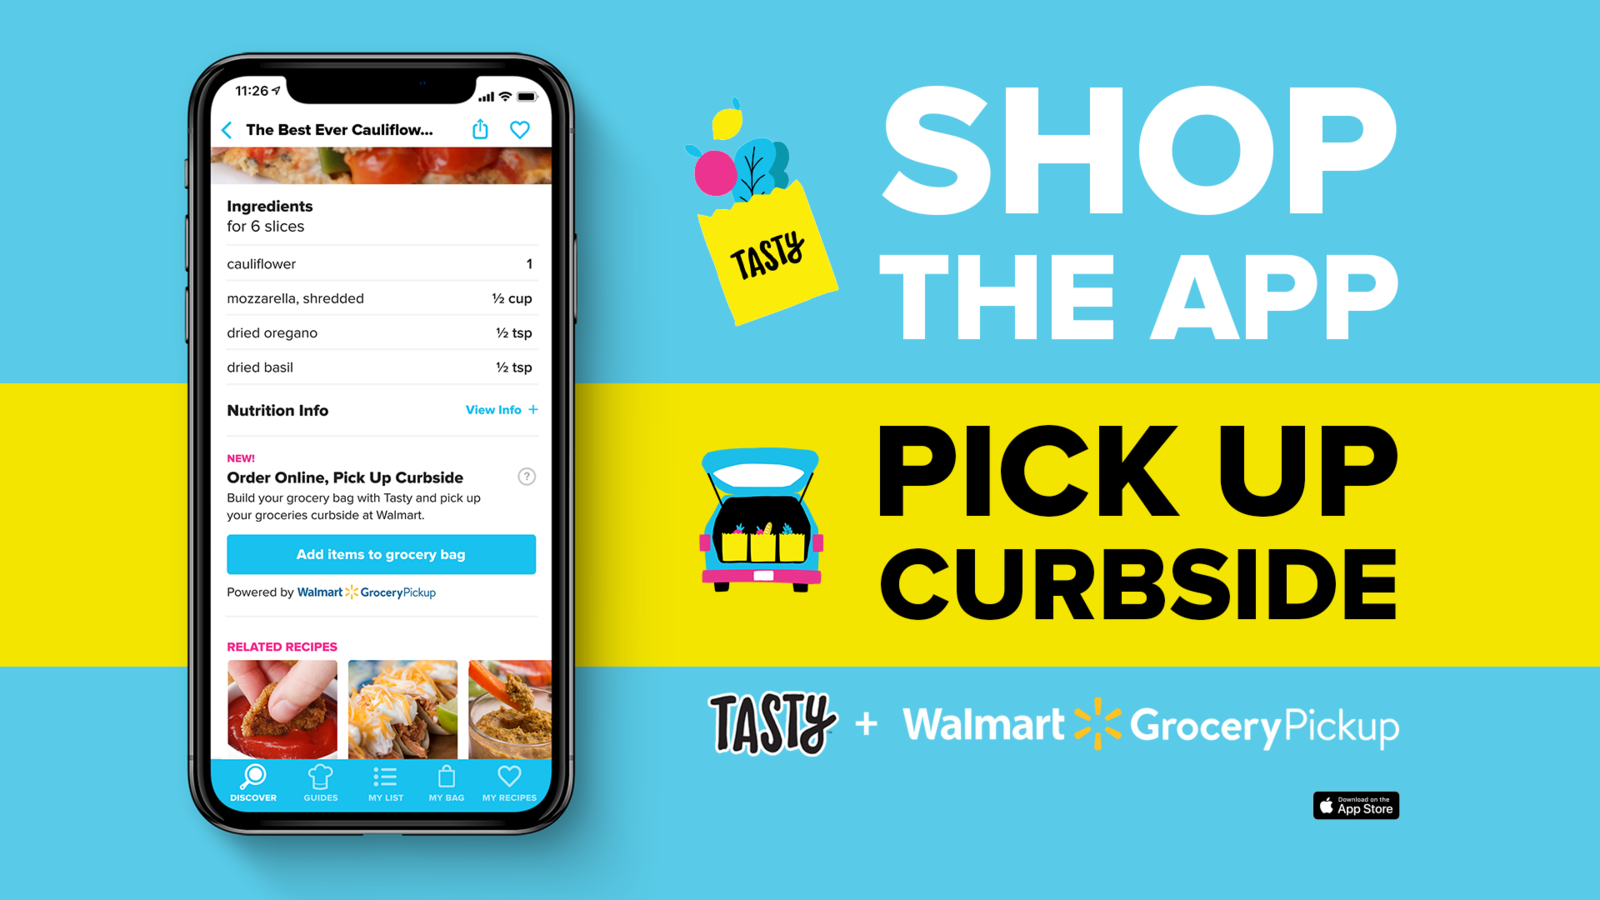 Advertisement for the Tasty app with Walmart Grocery Pickup showing app interface and curbside pickup option